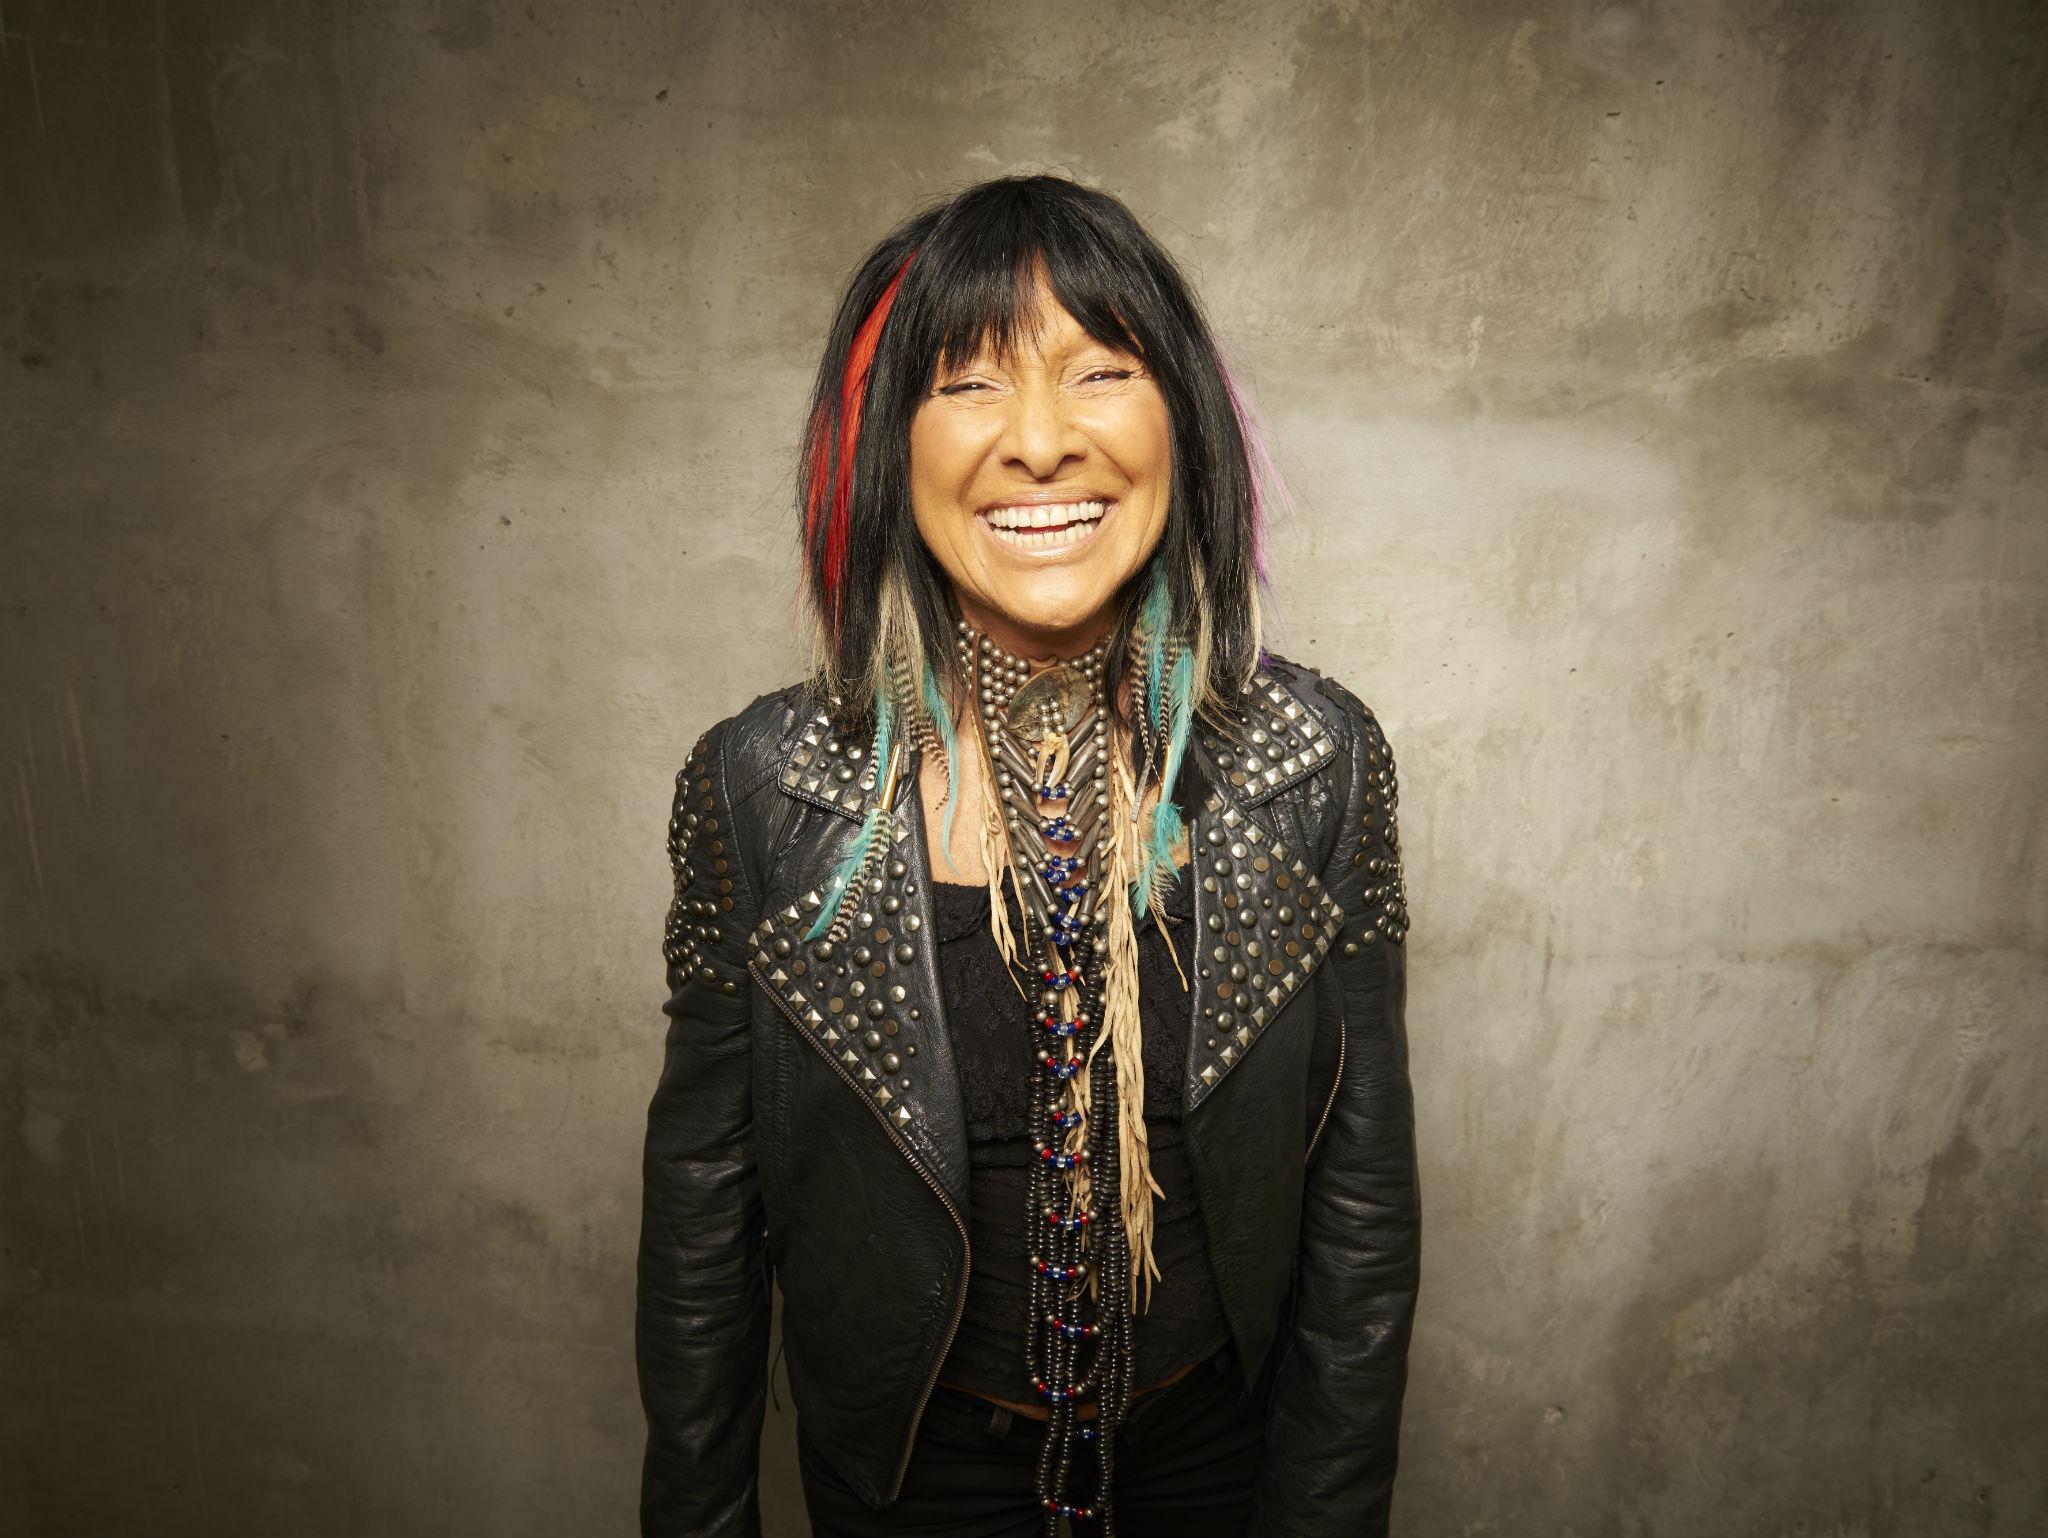 The Canadian-Indian Buffy Sainte-Marie's new album is full of protest songs 